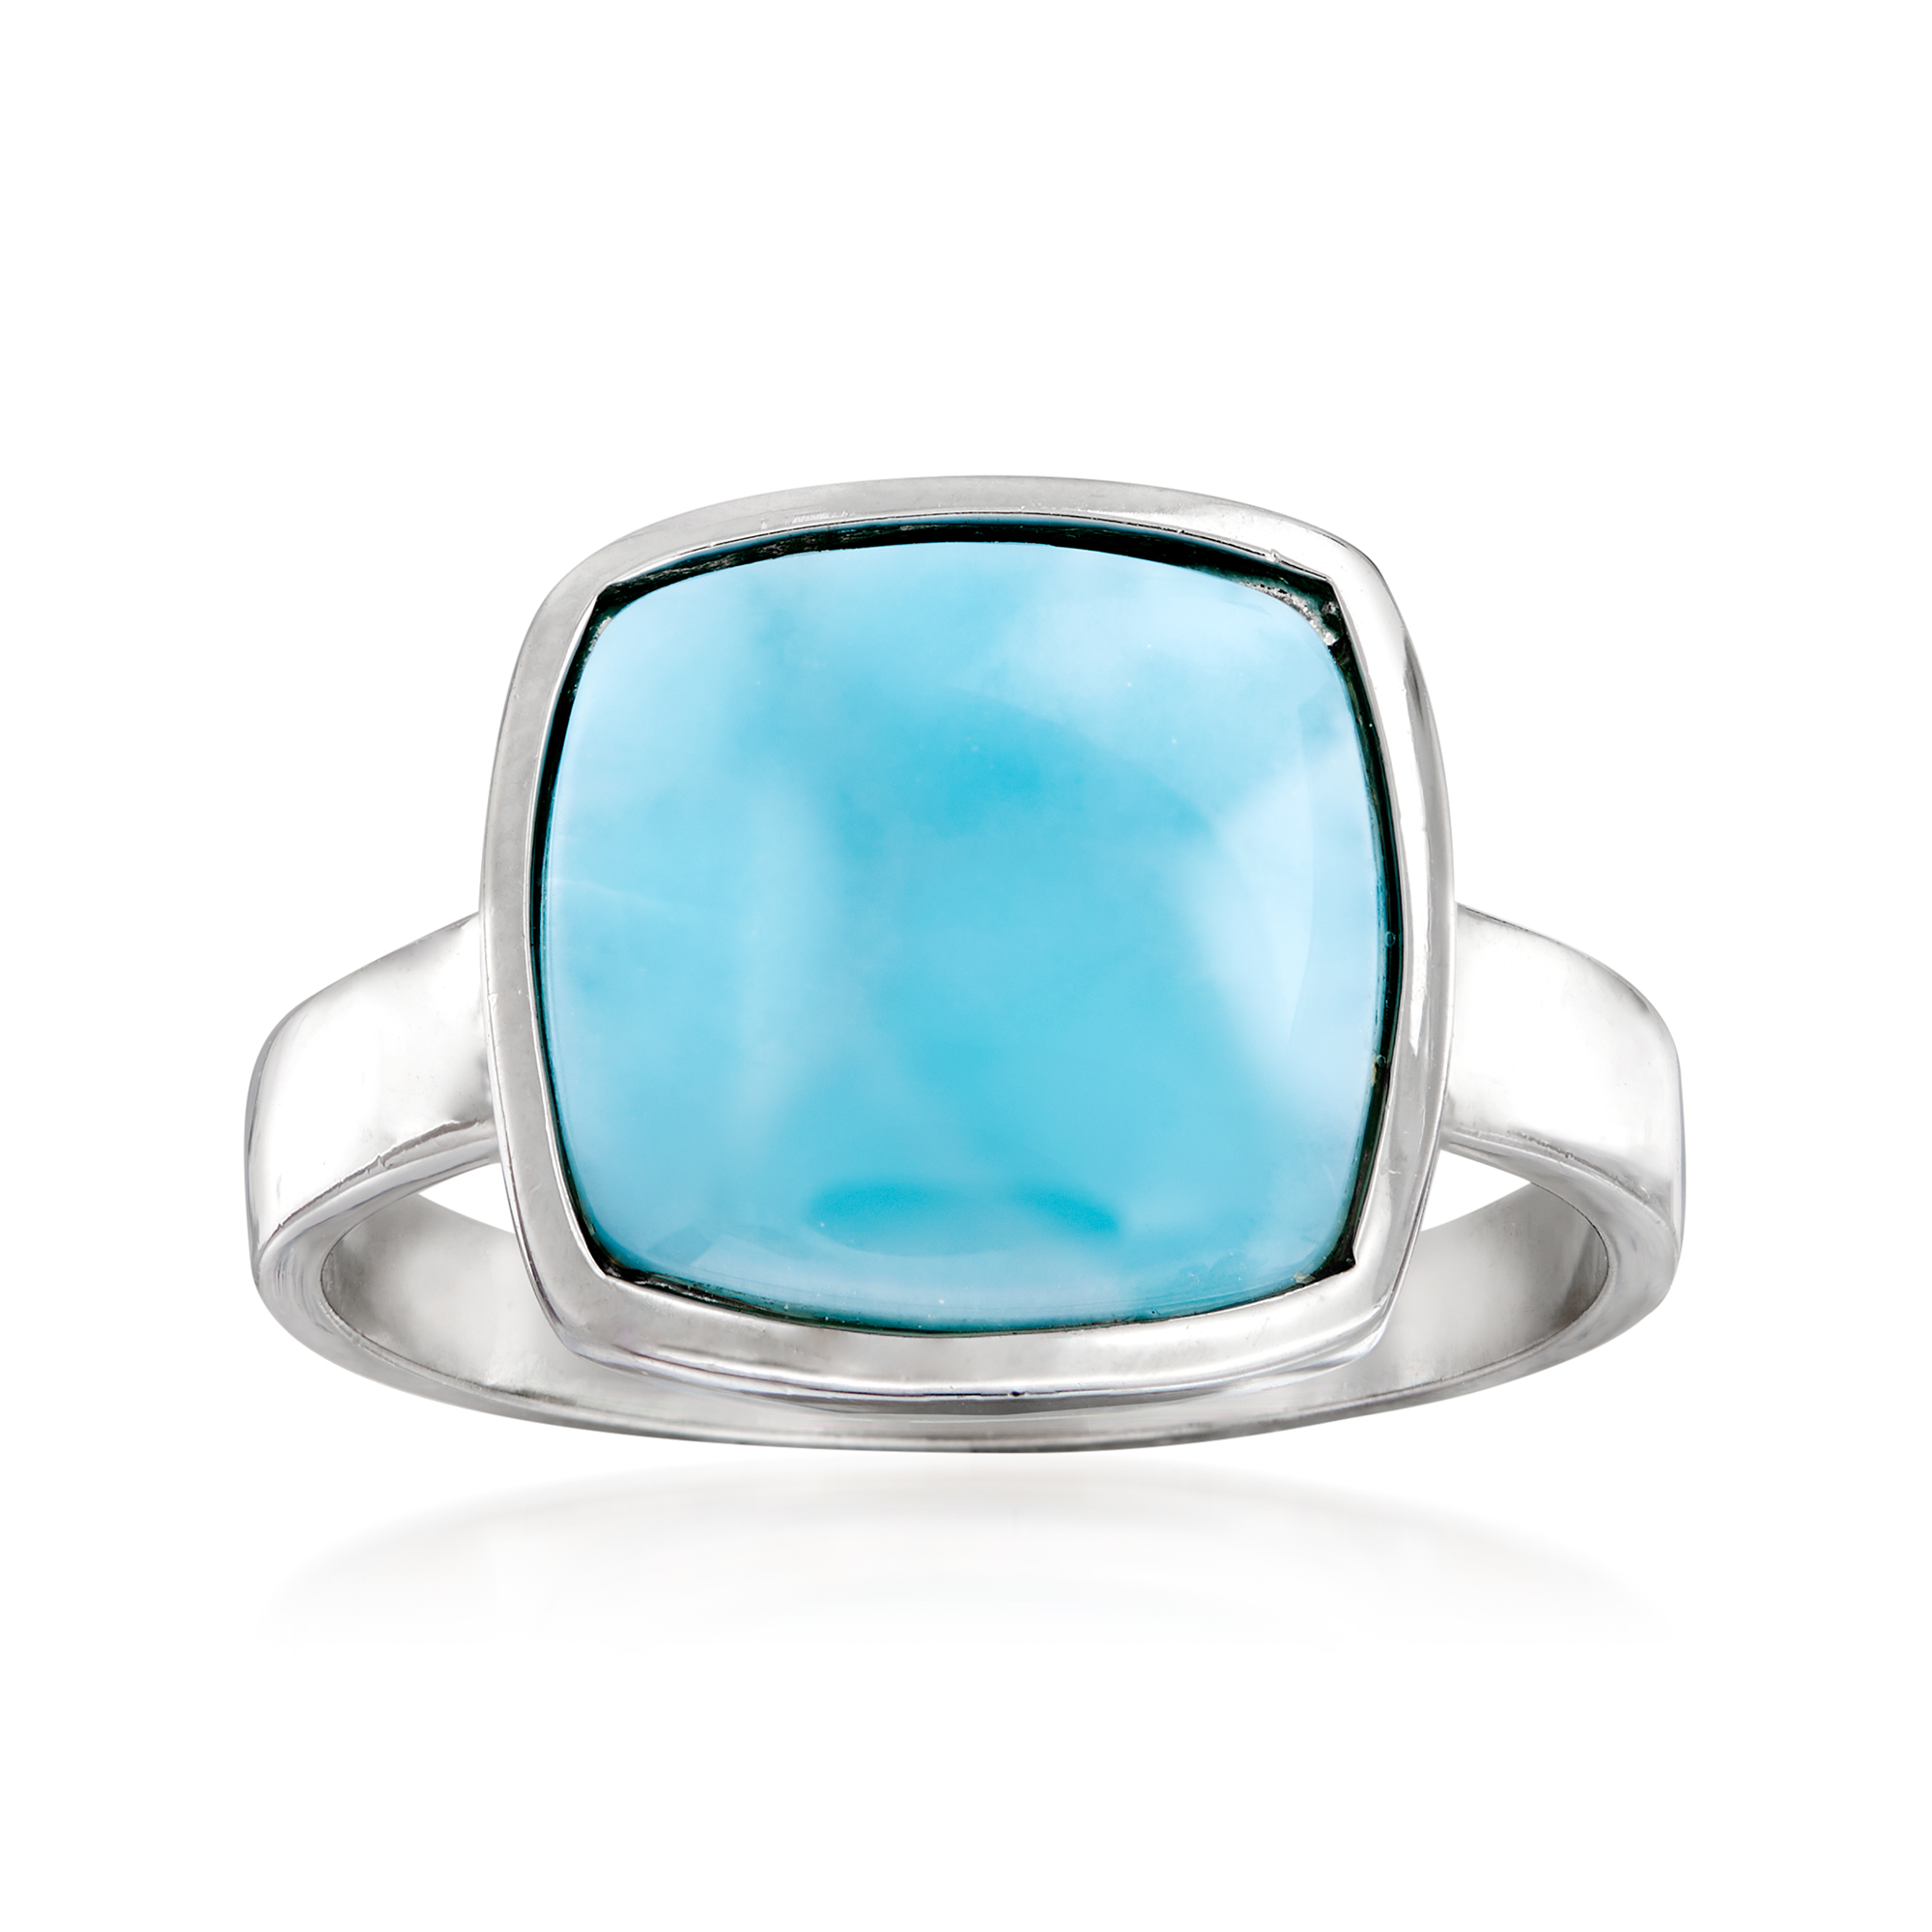 WHOLESALE 11PC 925 SOLID STERLING SILVER BLUE LARIMAR RING LOT U896 